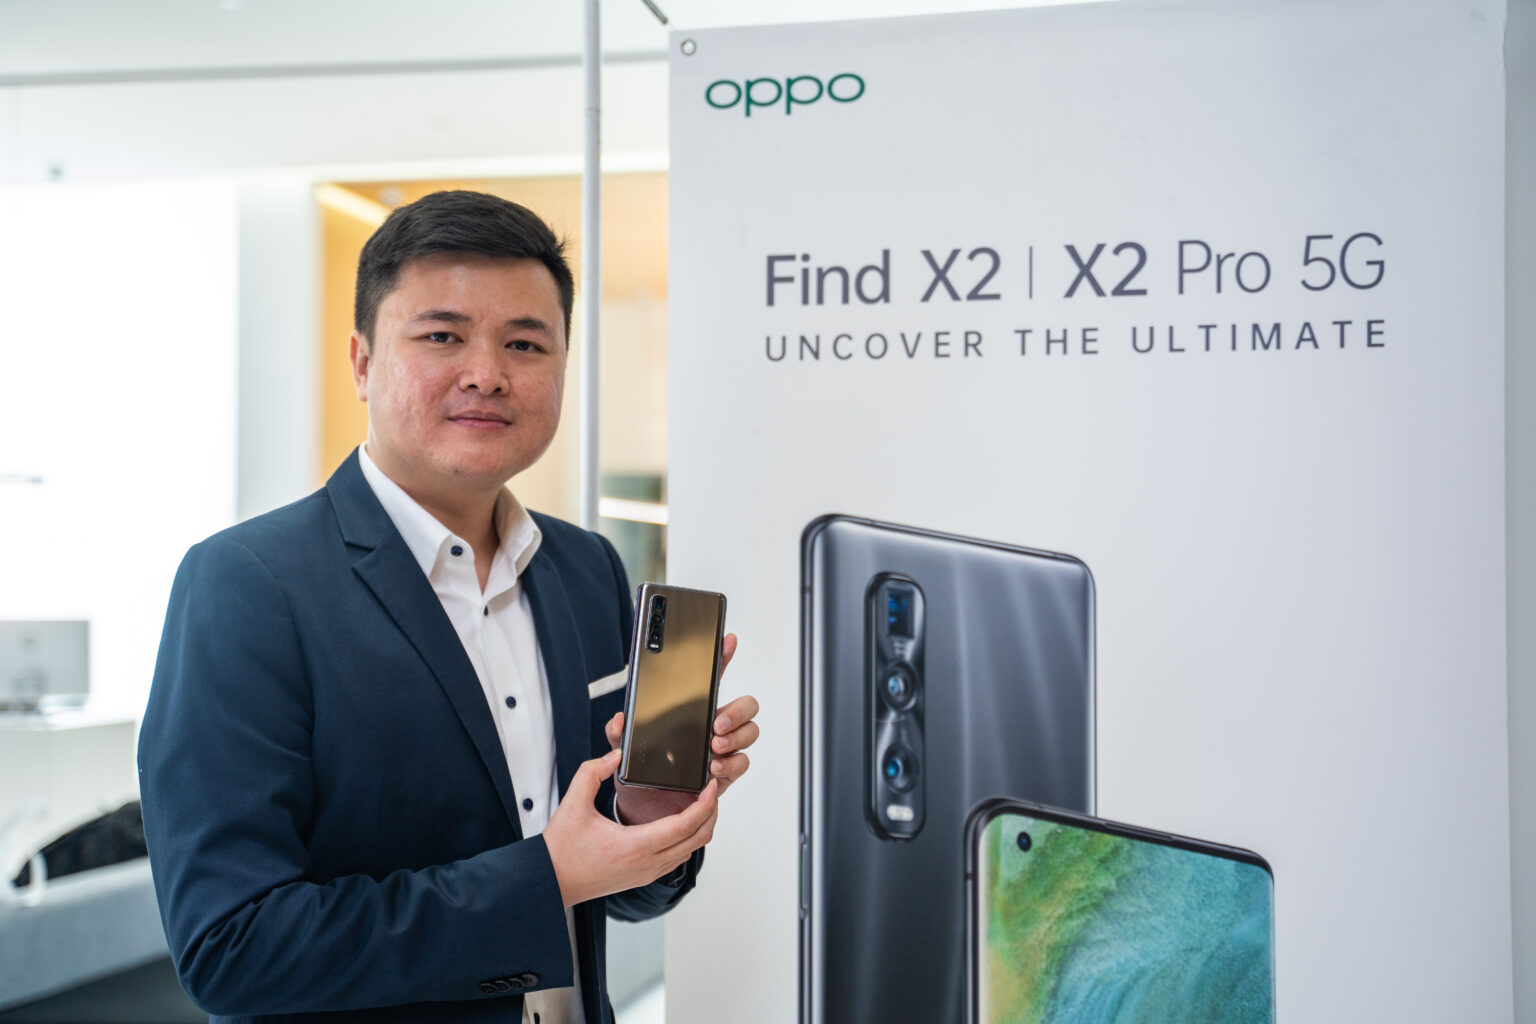 OPPO Find X2 and Find X2 Pro revealed